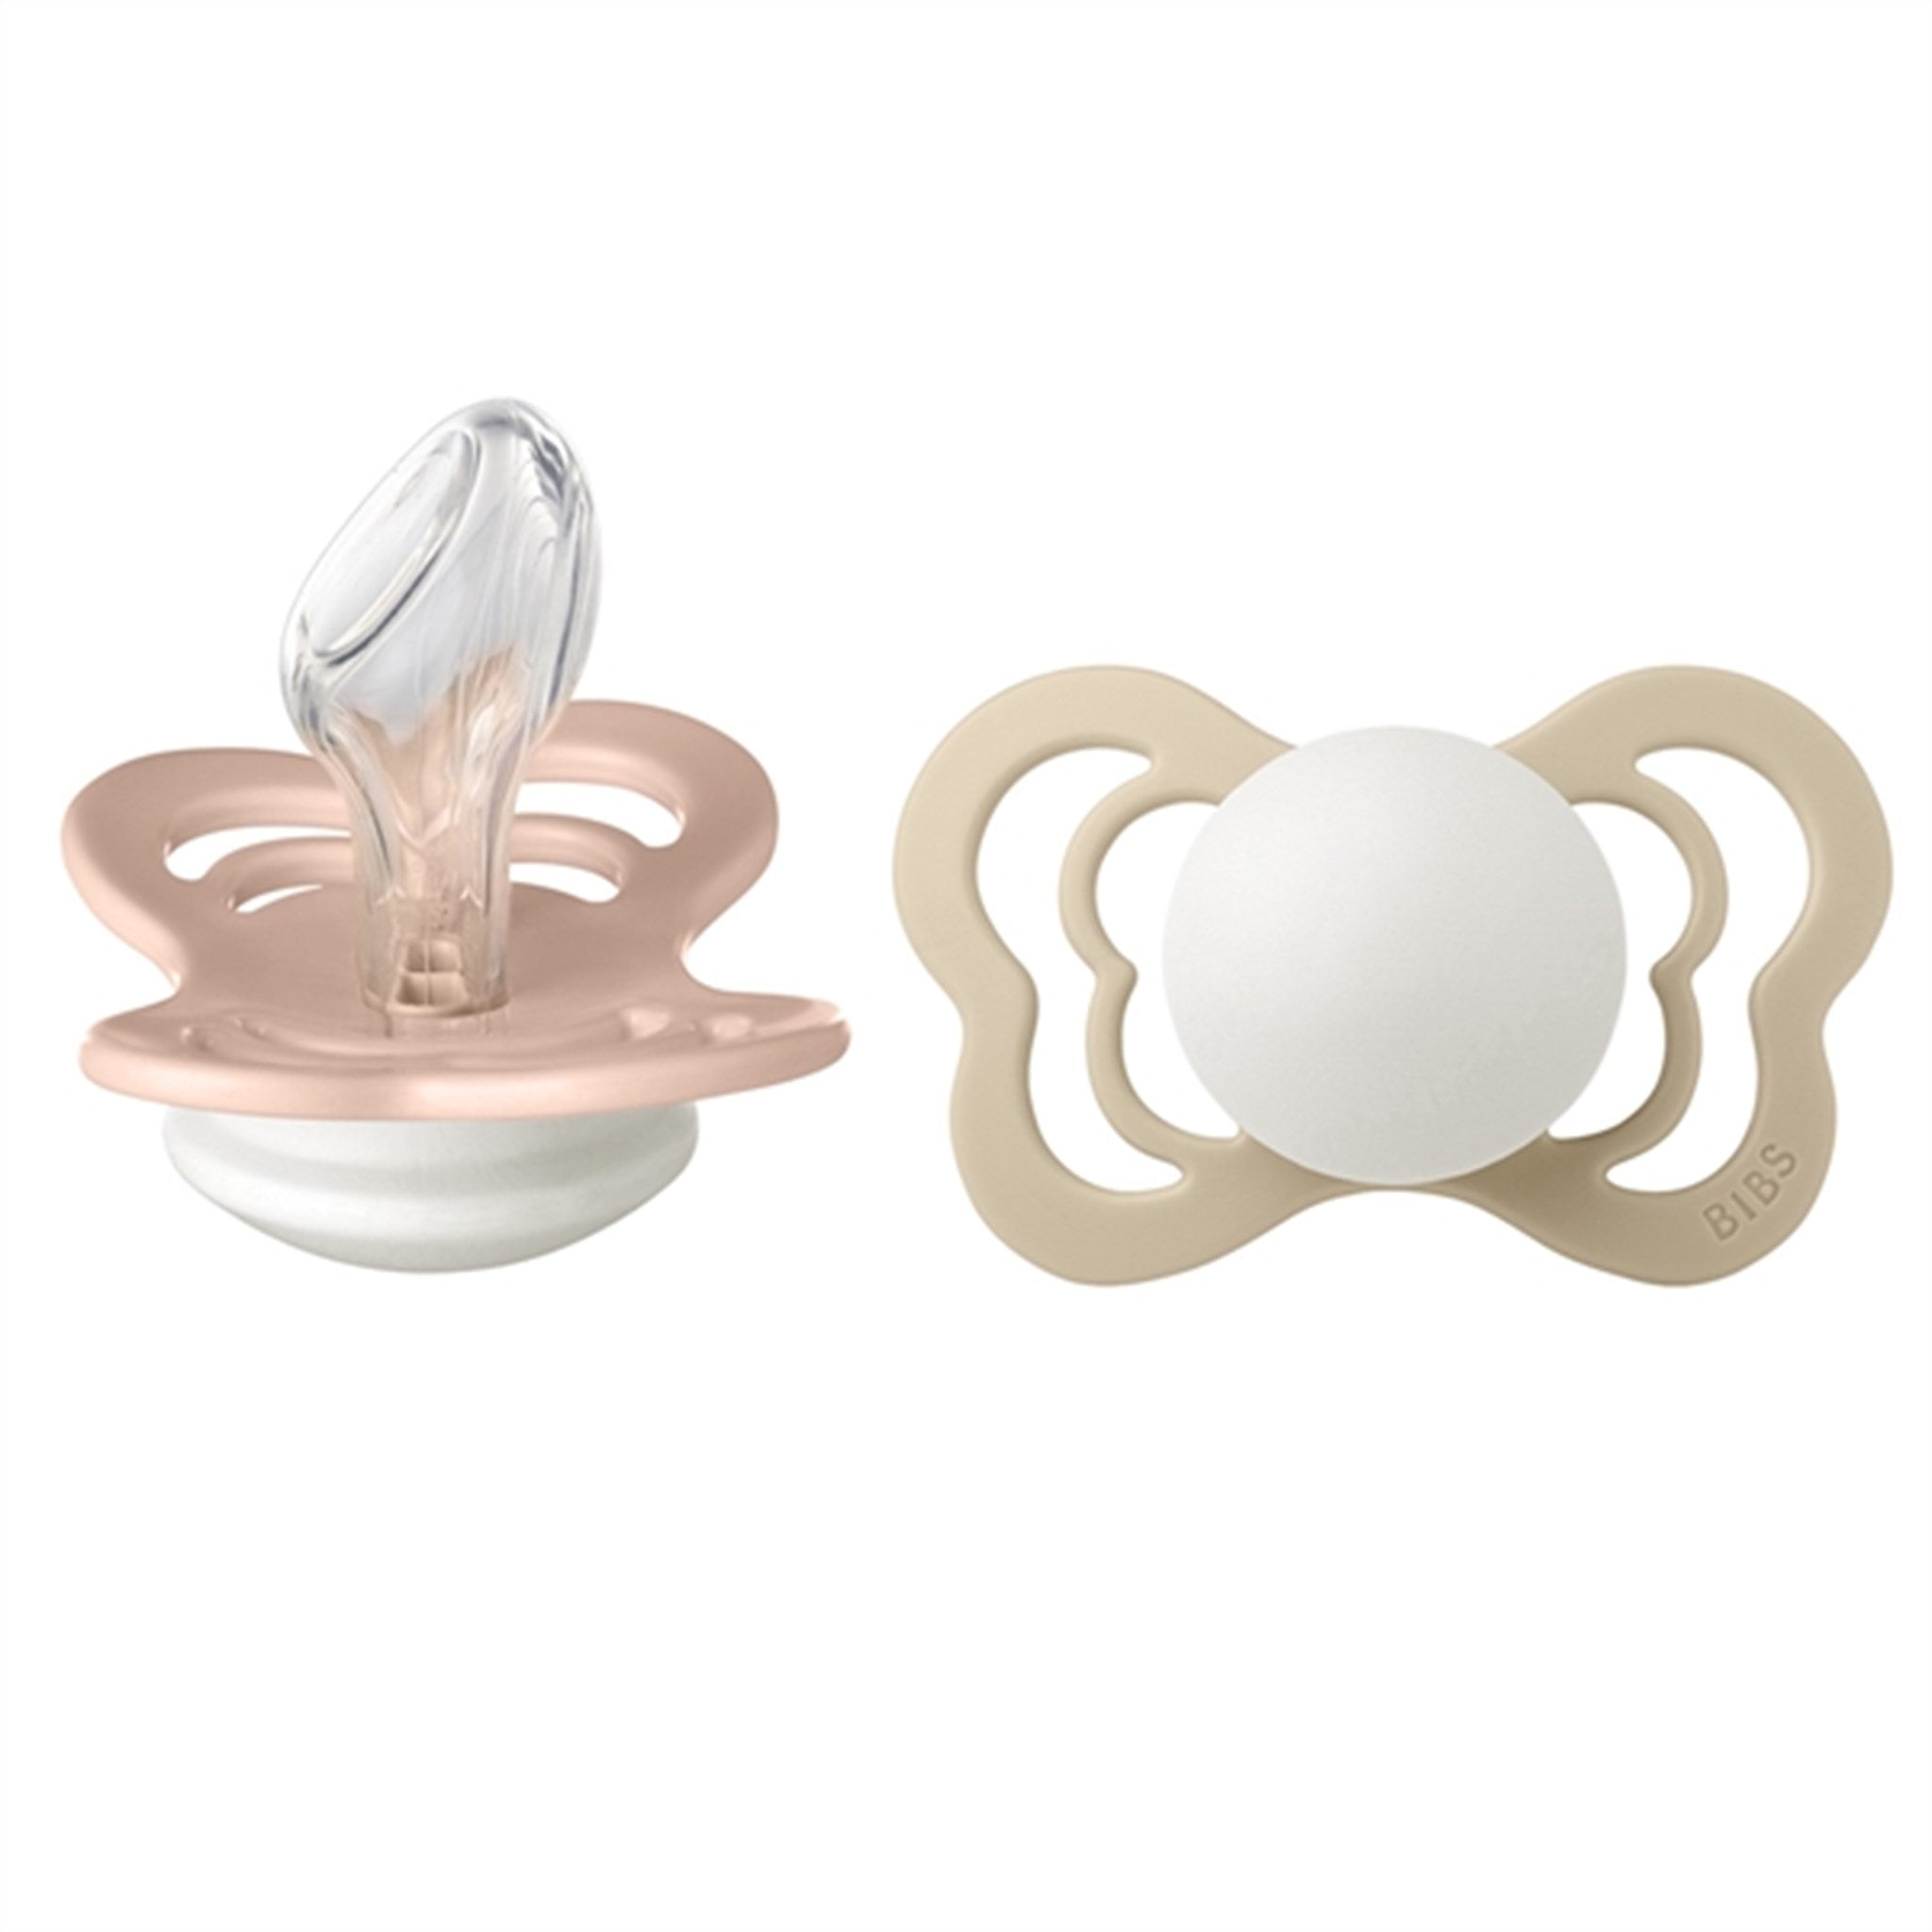 Bibs Couture Silicone Pacifiers Glow 2-pack Anatomical Blush/Vanilla